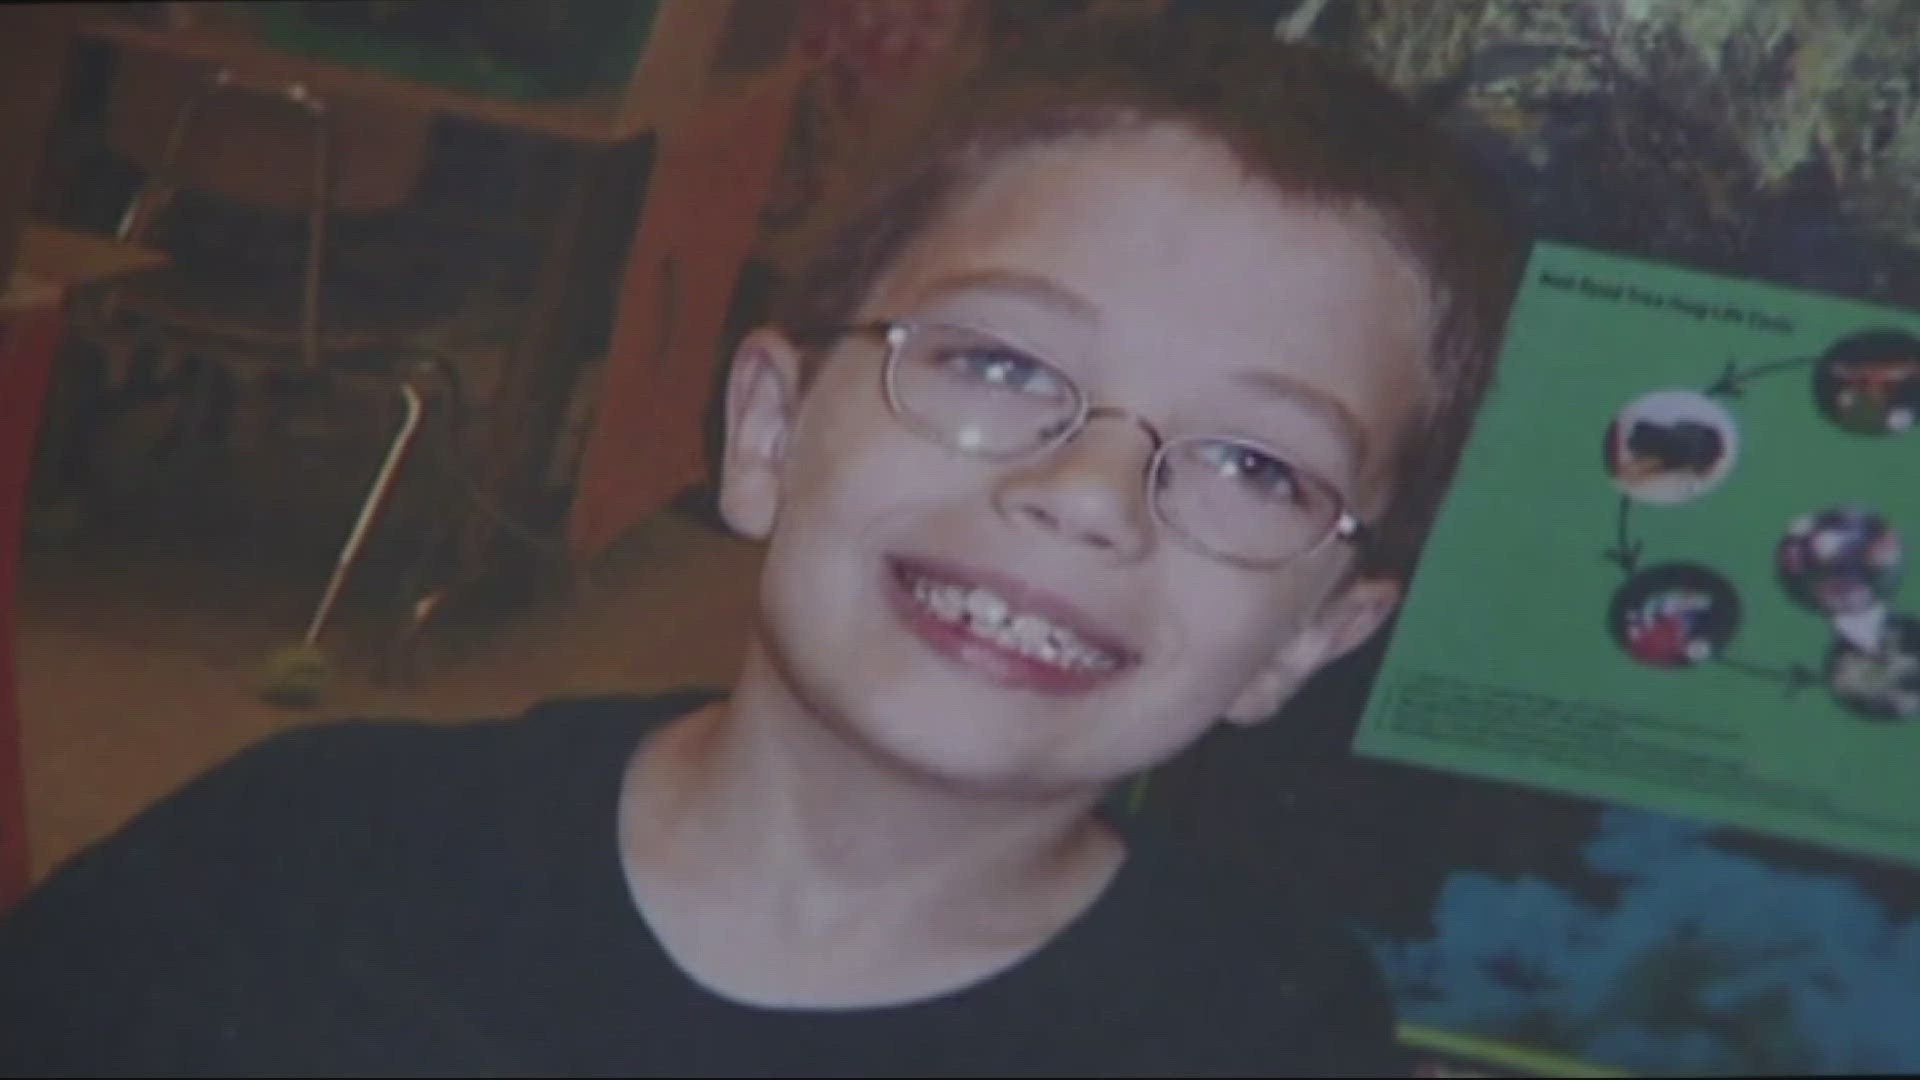 Kyron was a second-grader when he disappeared from Skyline School in Portland in 2010. Police say the case is still open and active.